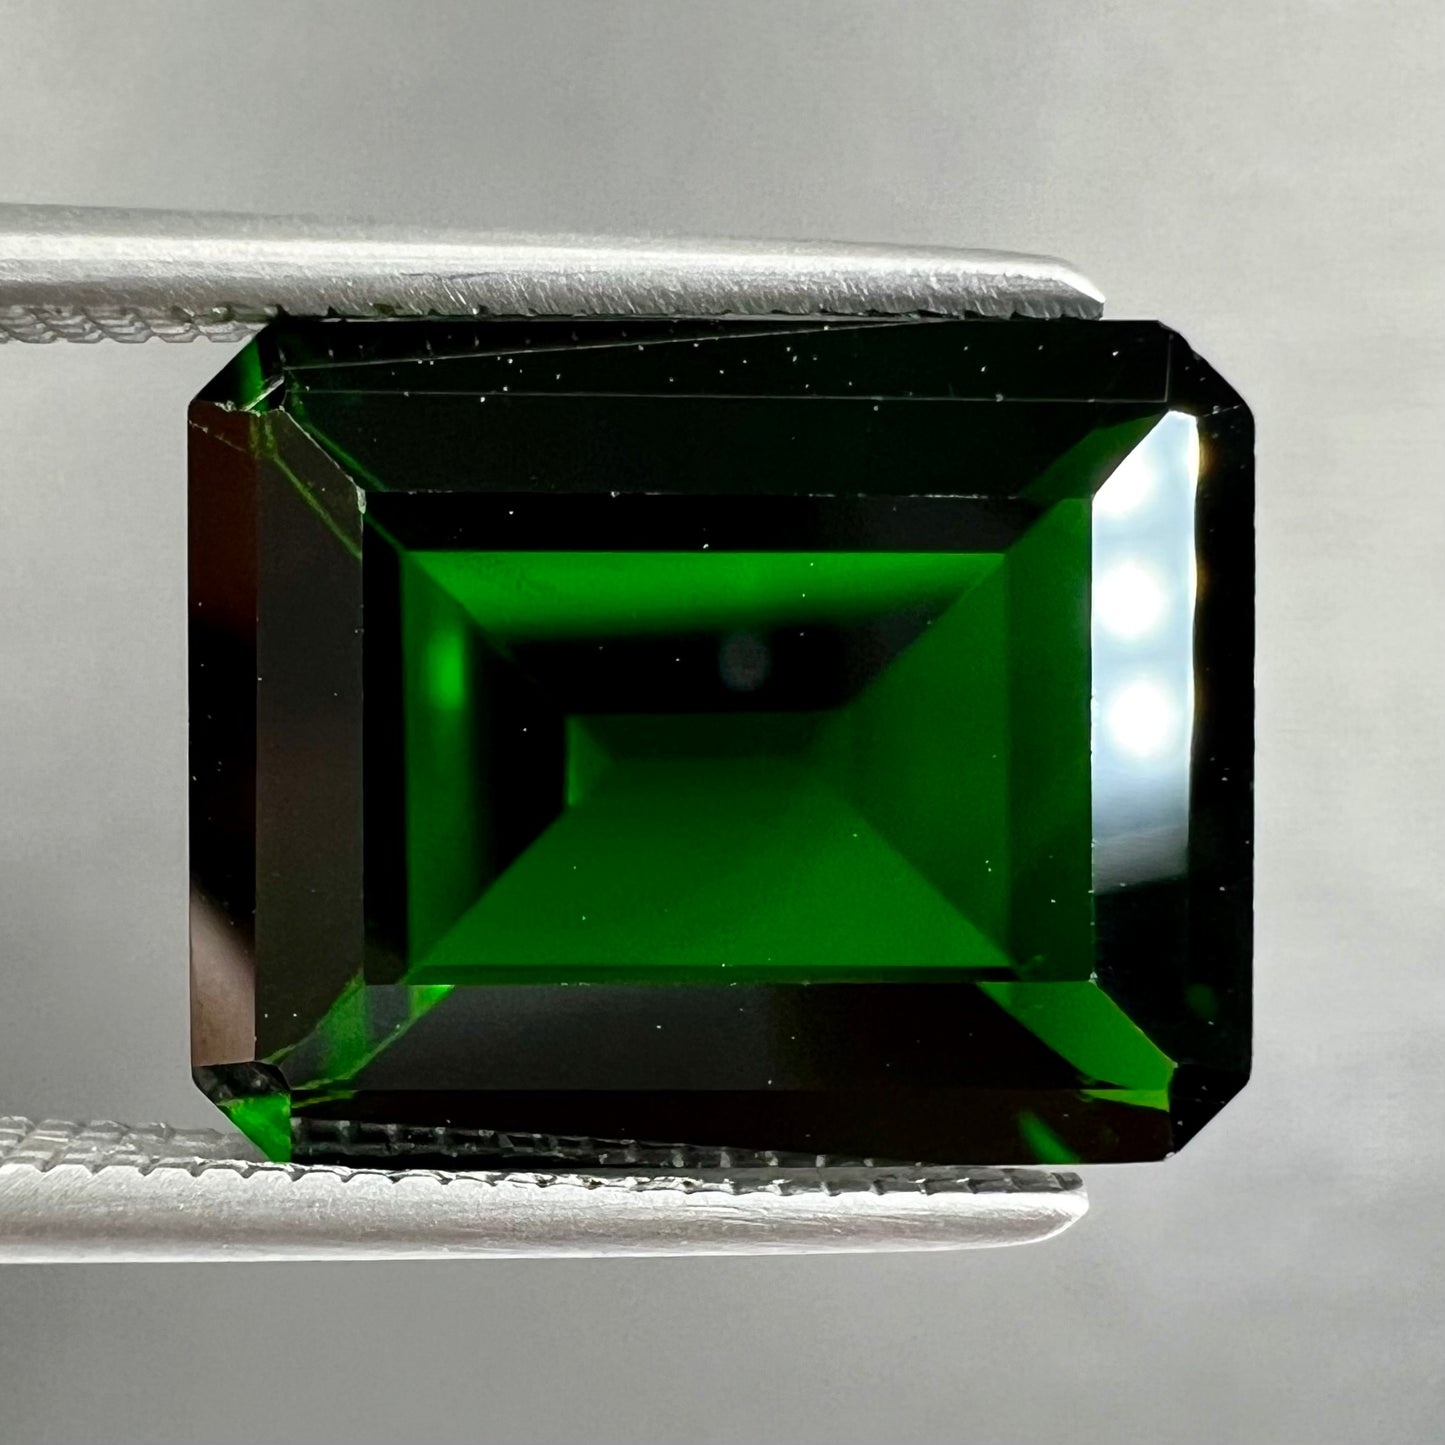 A large, emerald cut chrome diopside gemstone.  The gem is dark green color.